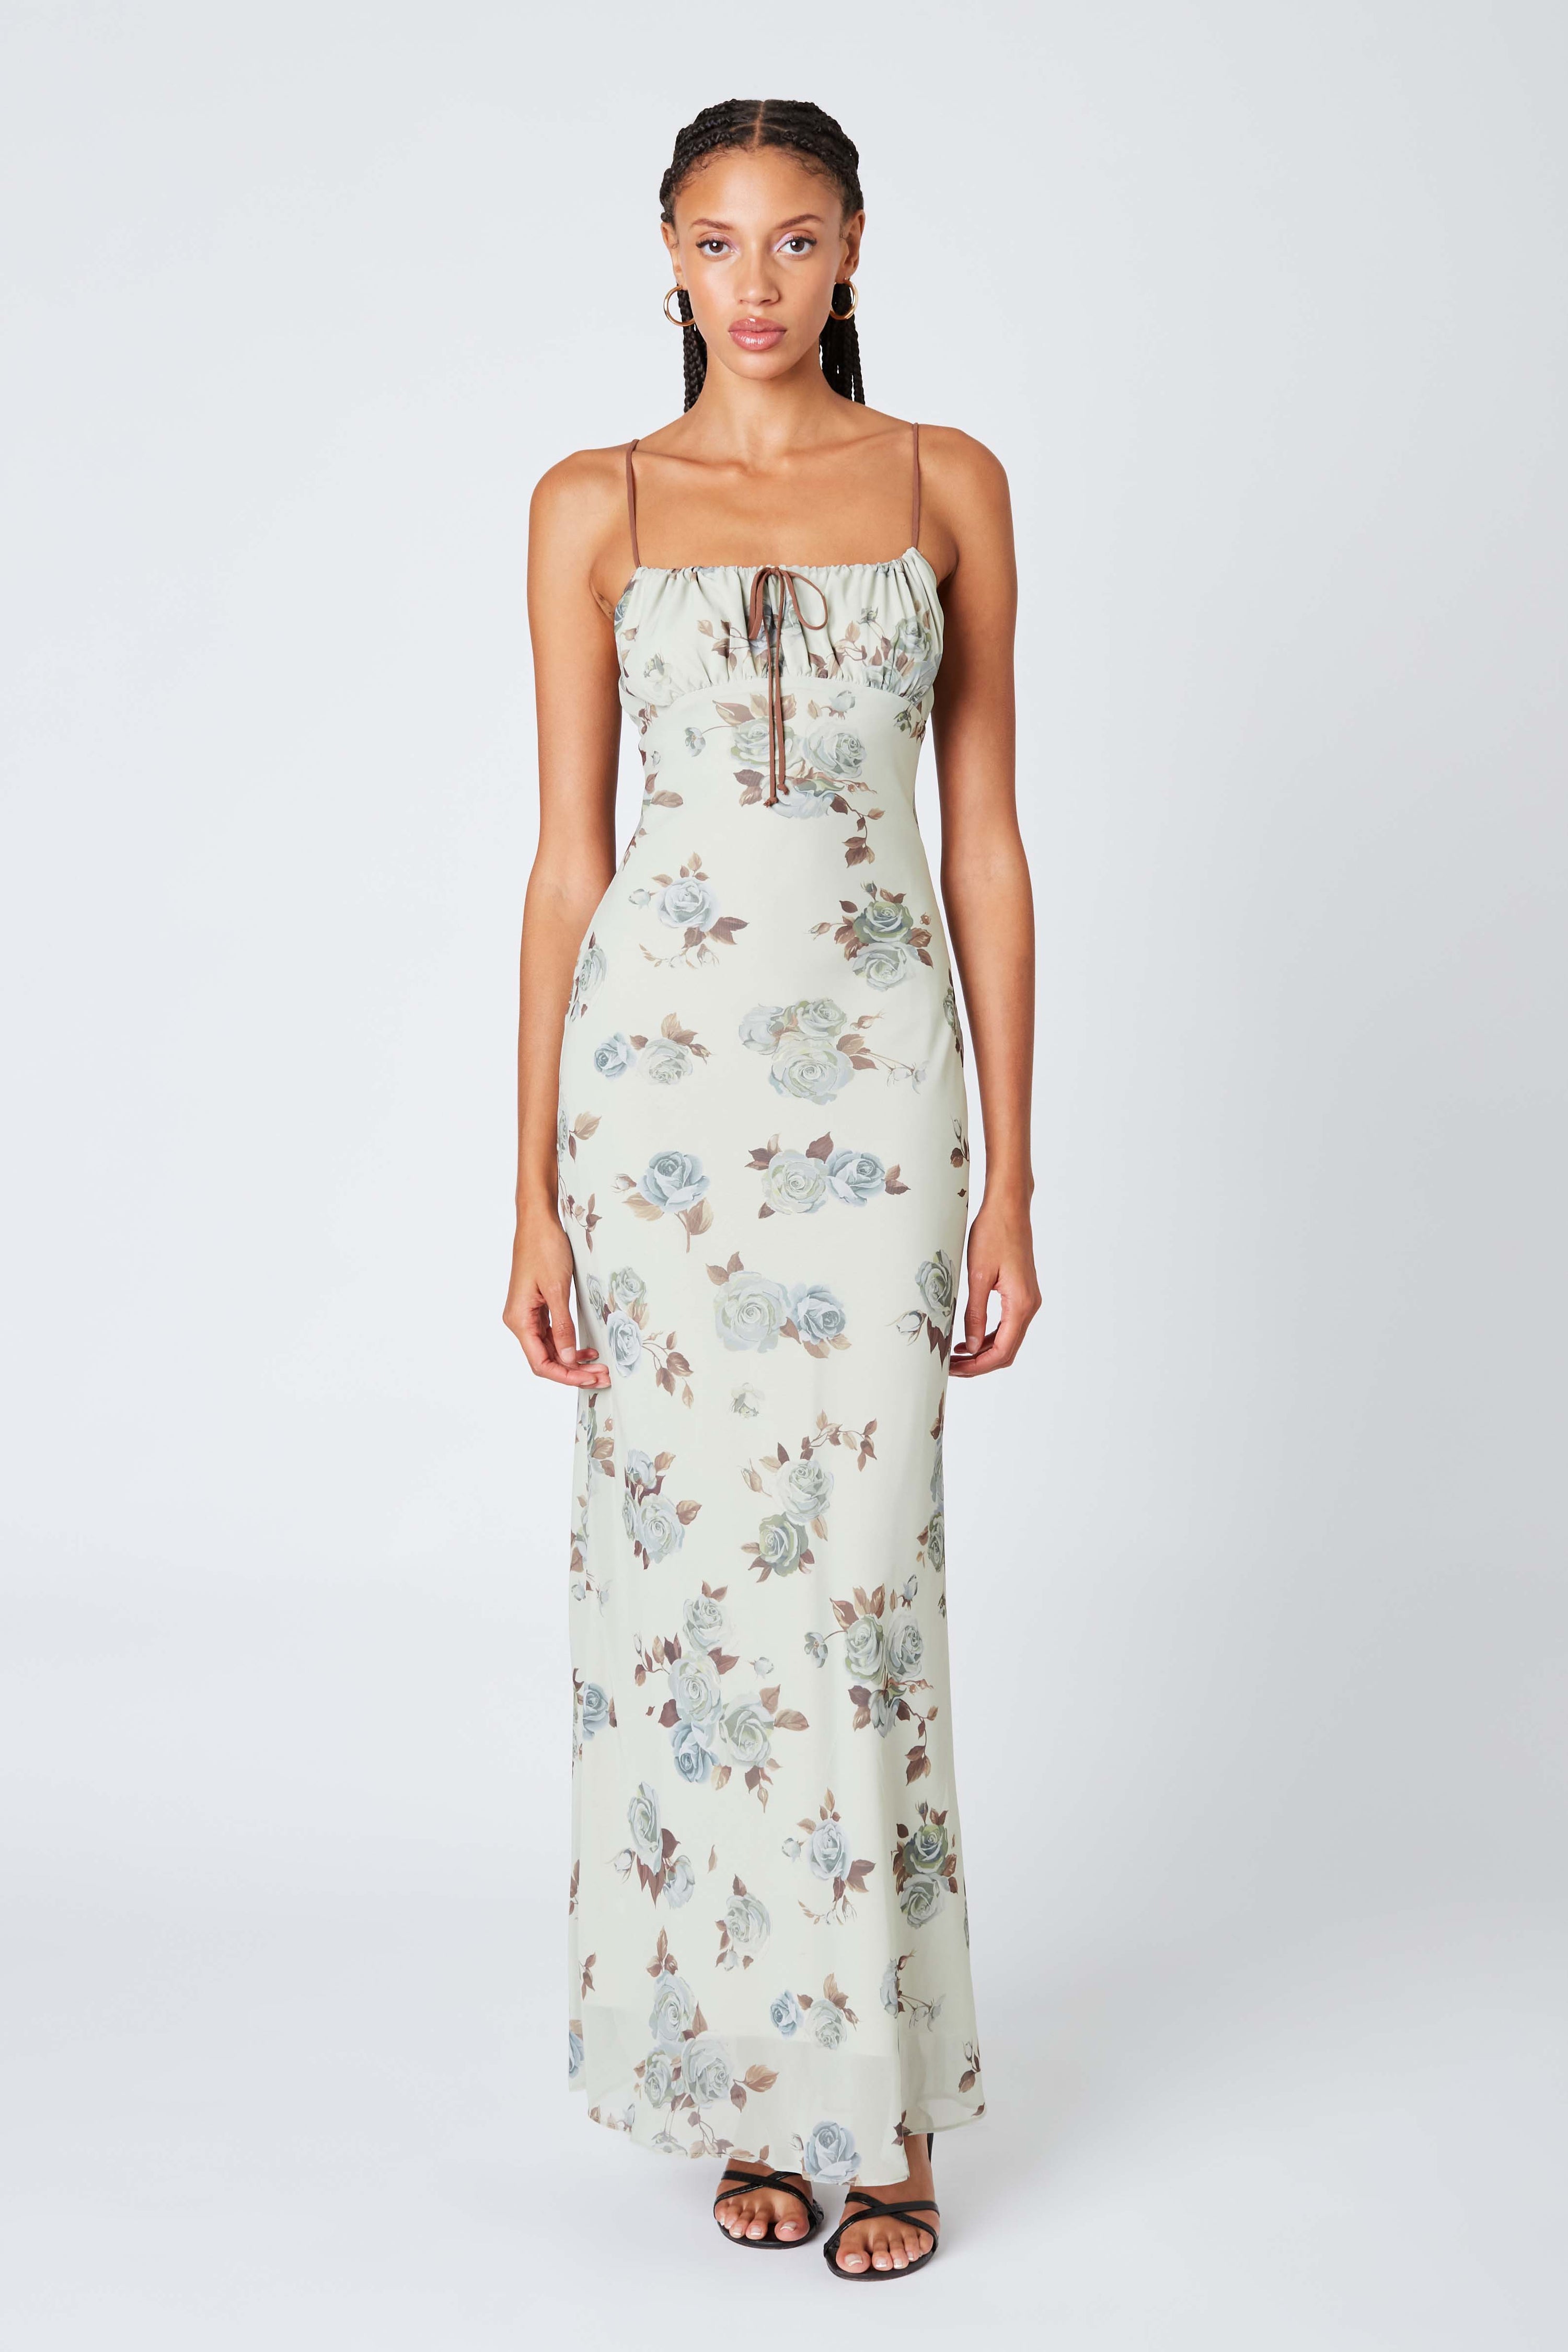 Fern Floral Print Maxi Dress | Collective Request 